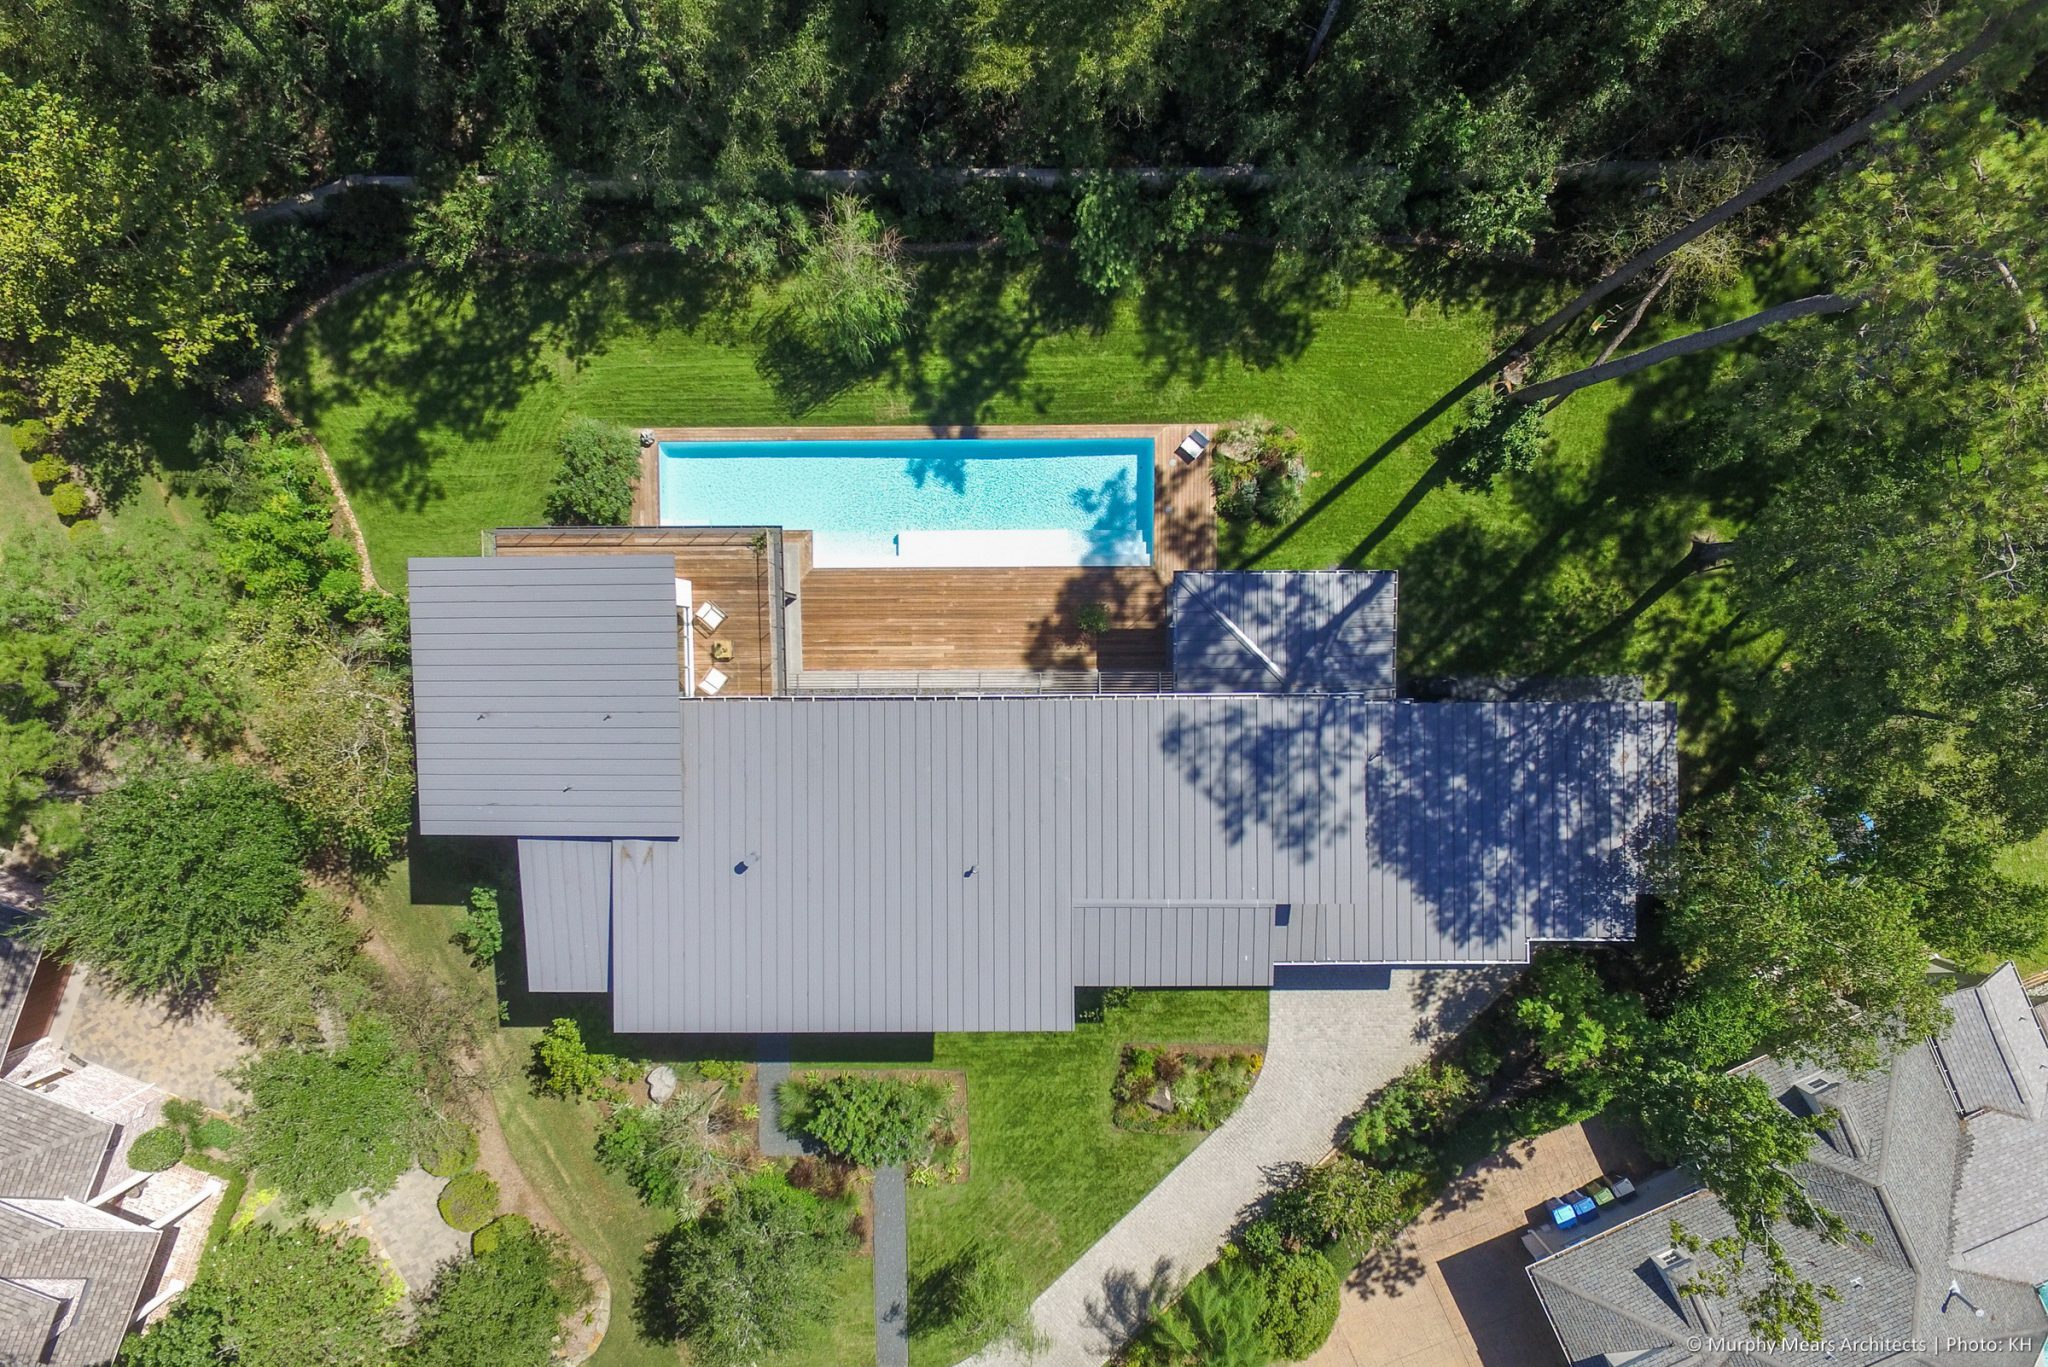 Carlton Woods Residence - Standing seam metal roof, oriented south for solar panels.